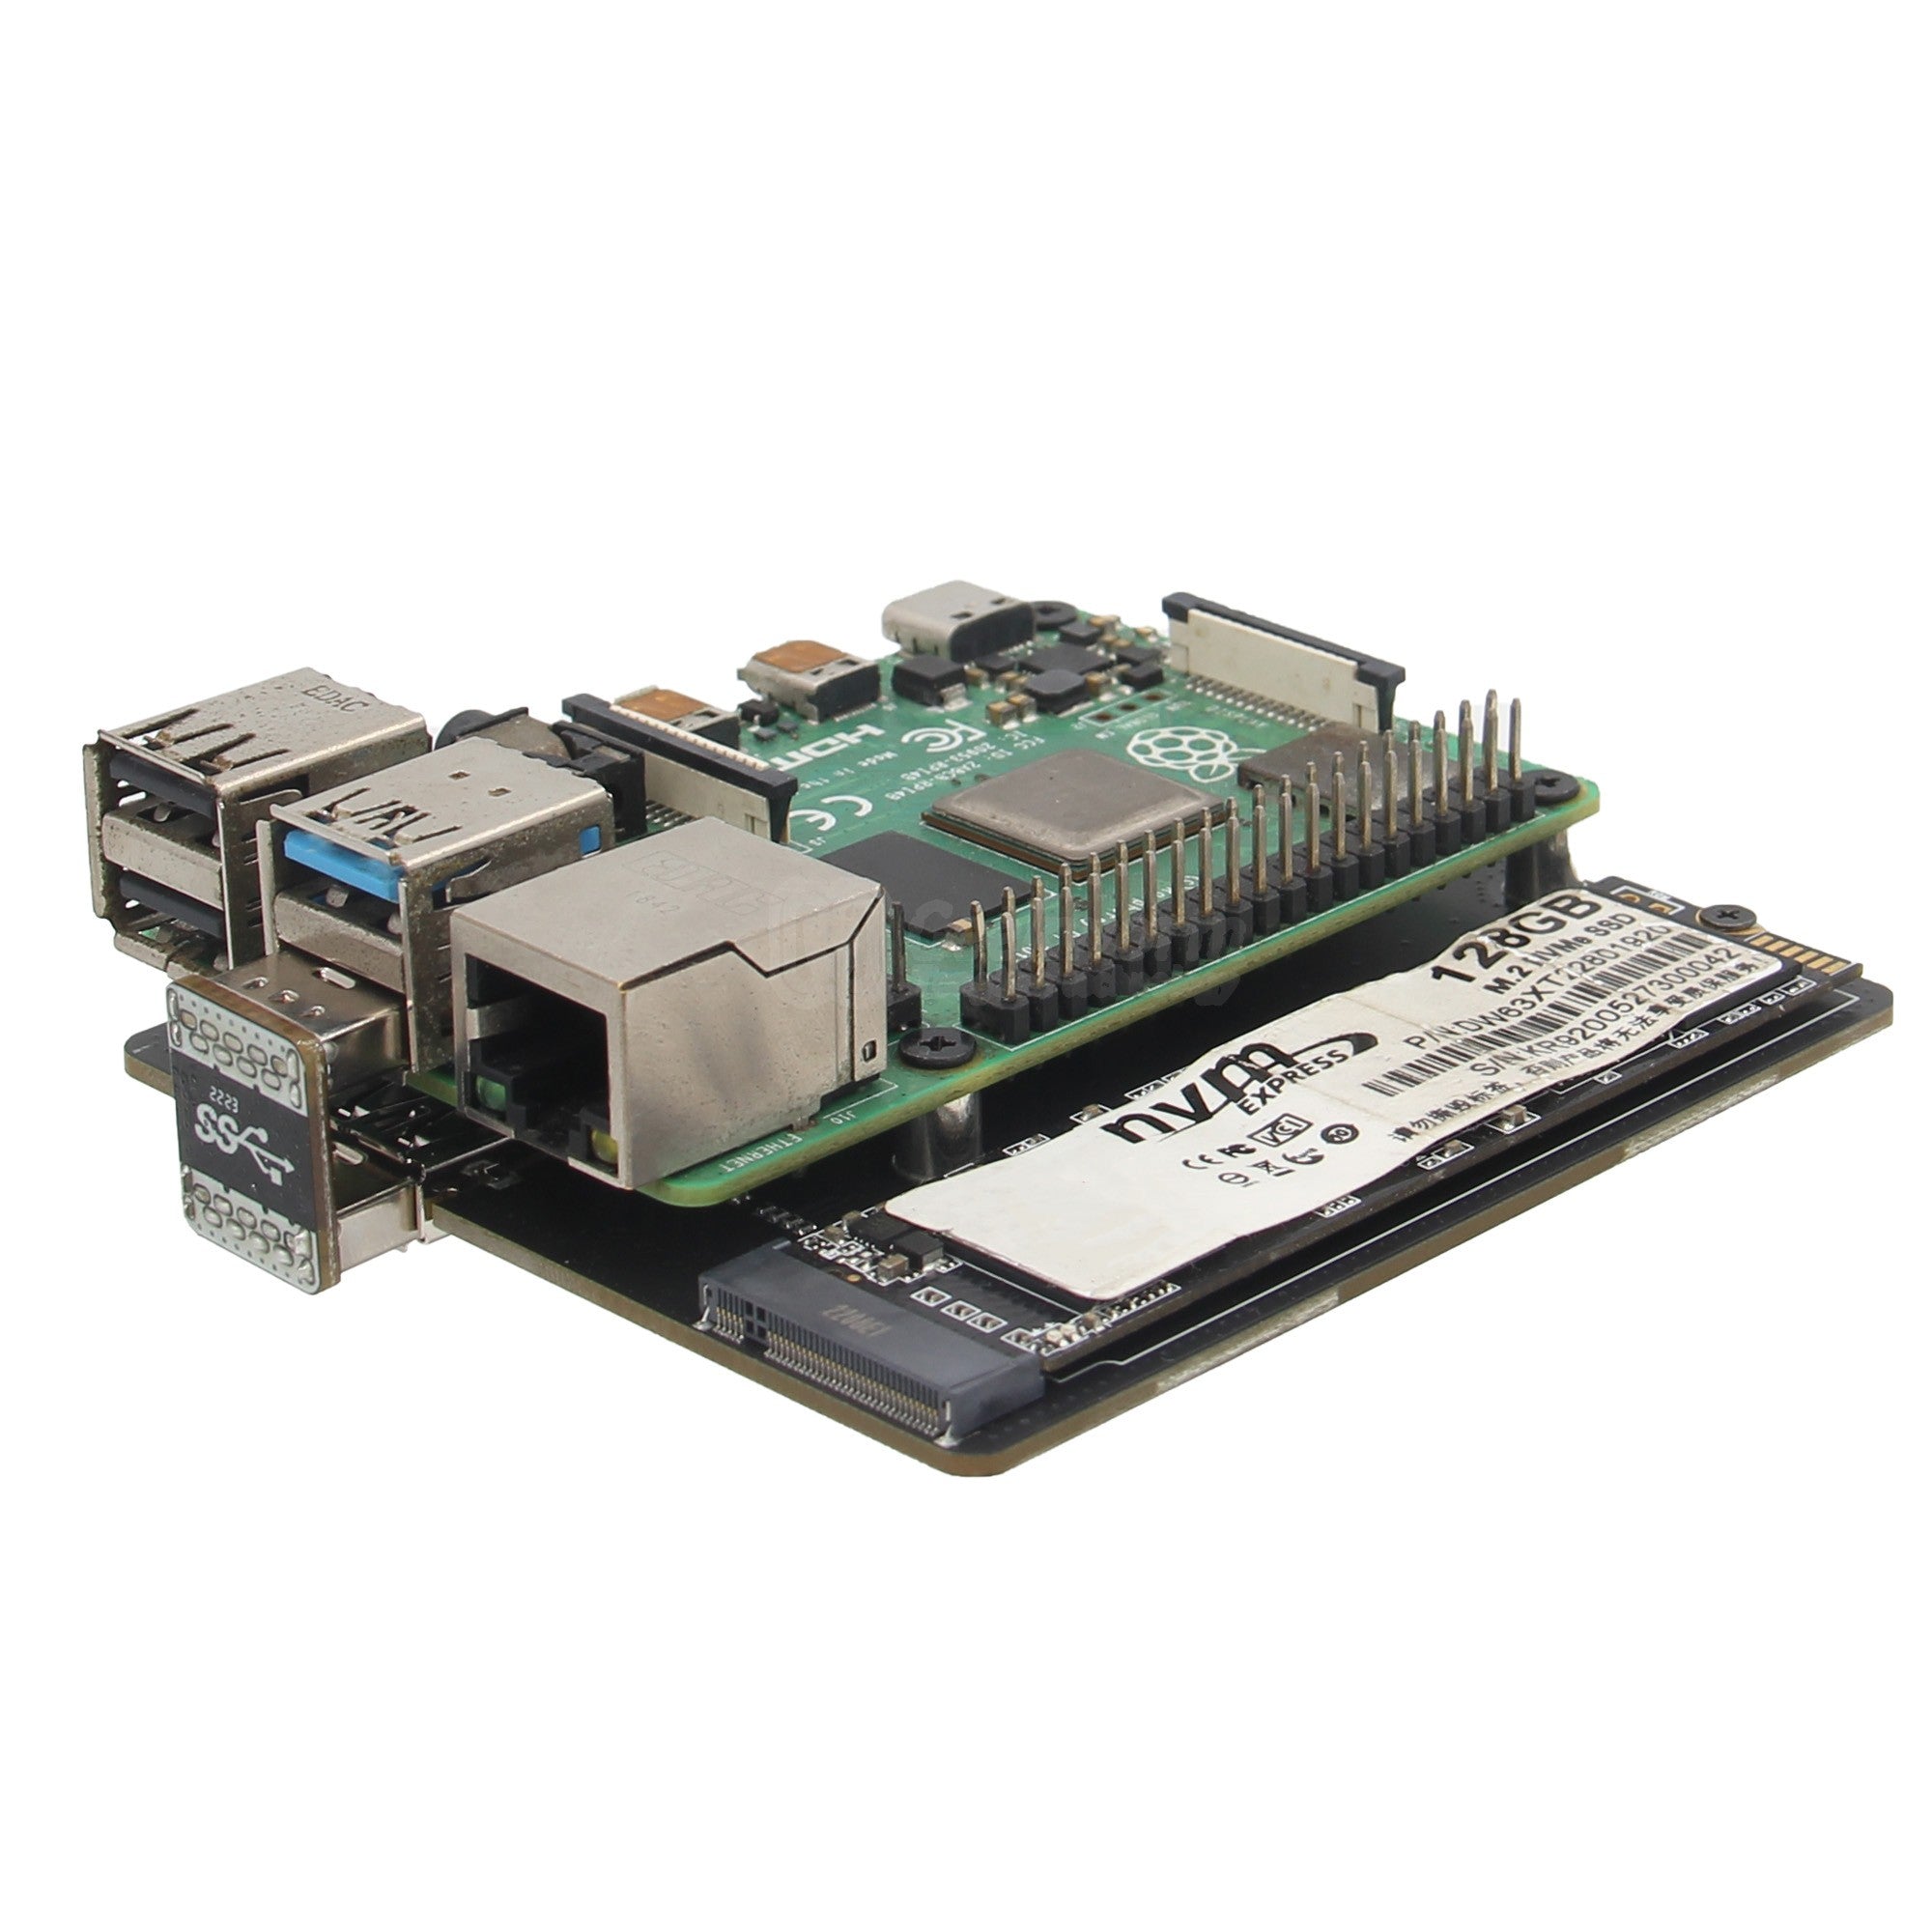 GeeekPi M.2 NVME SSD Storage Expansion Board for Raspberry Pi 4, Only  Support M.2 NVME SSD (Pi Board or M.2 NVME SSD NOT Included)